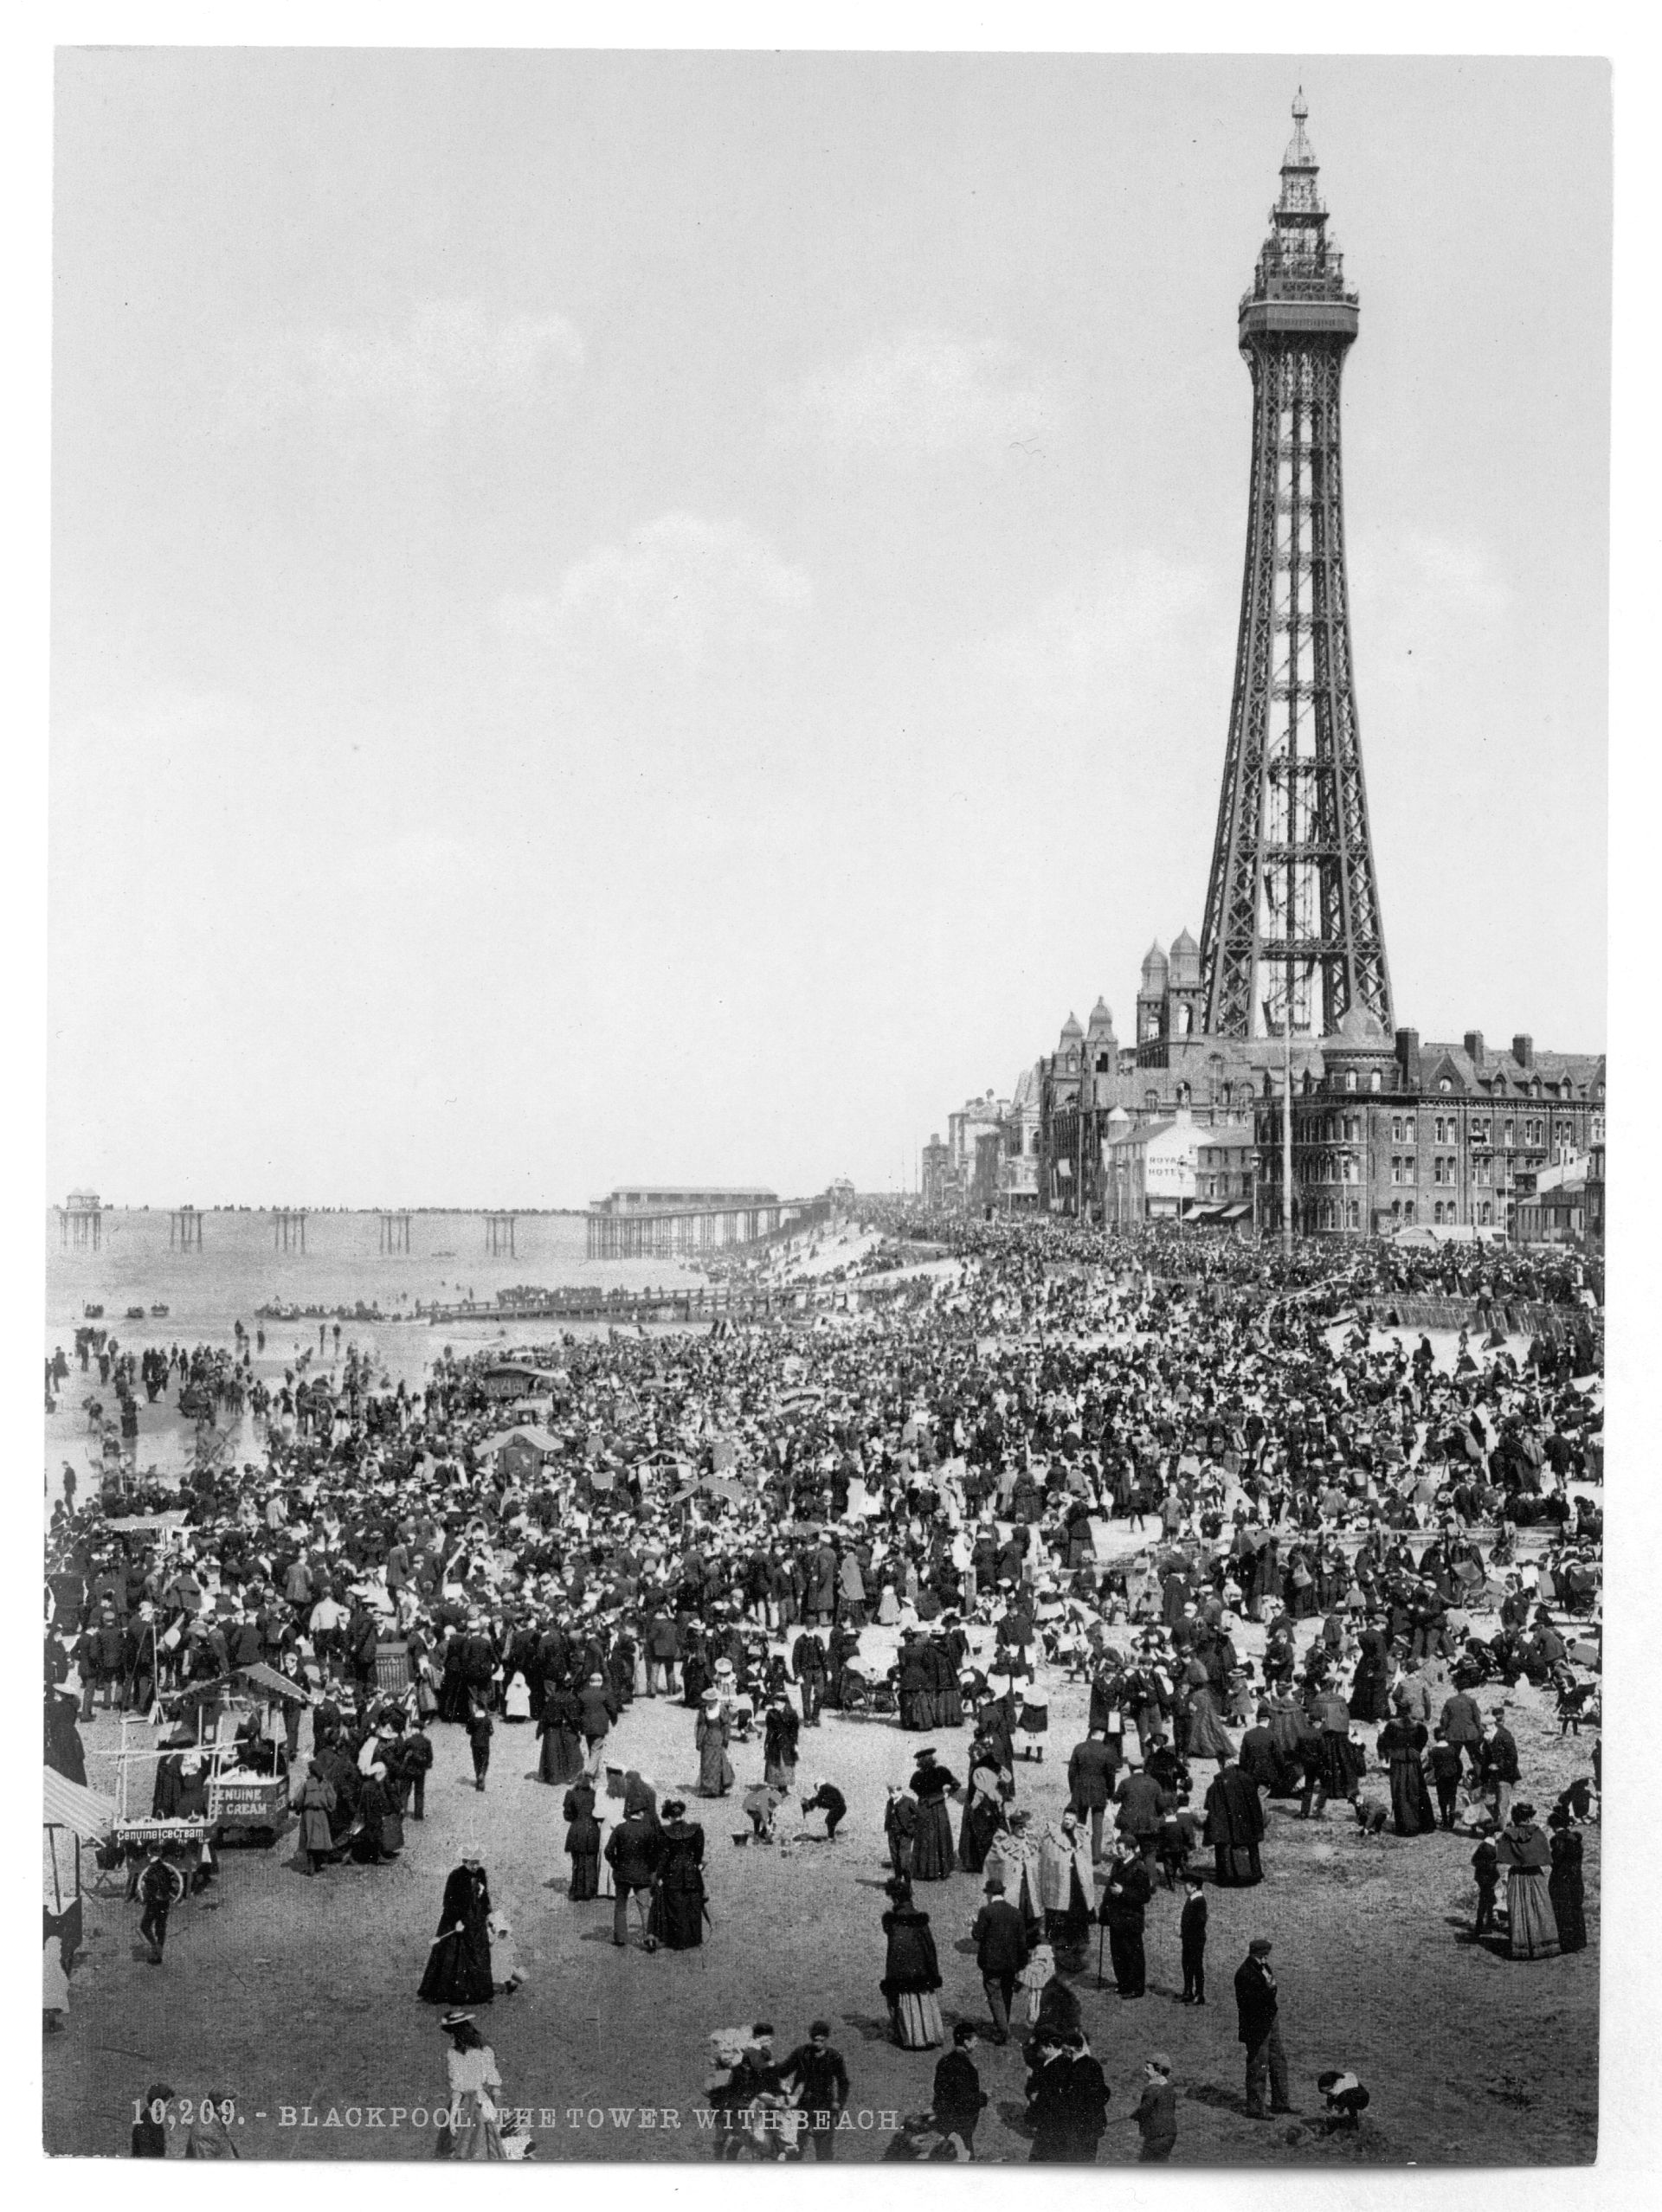 The tower with beach, Blackpool, England